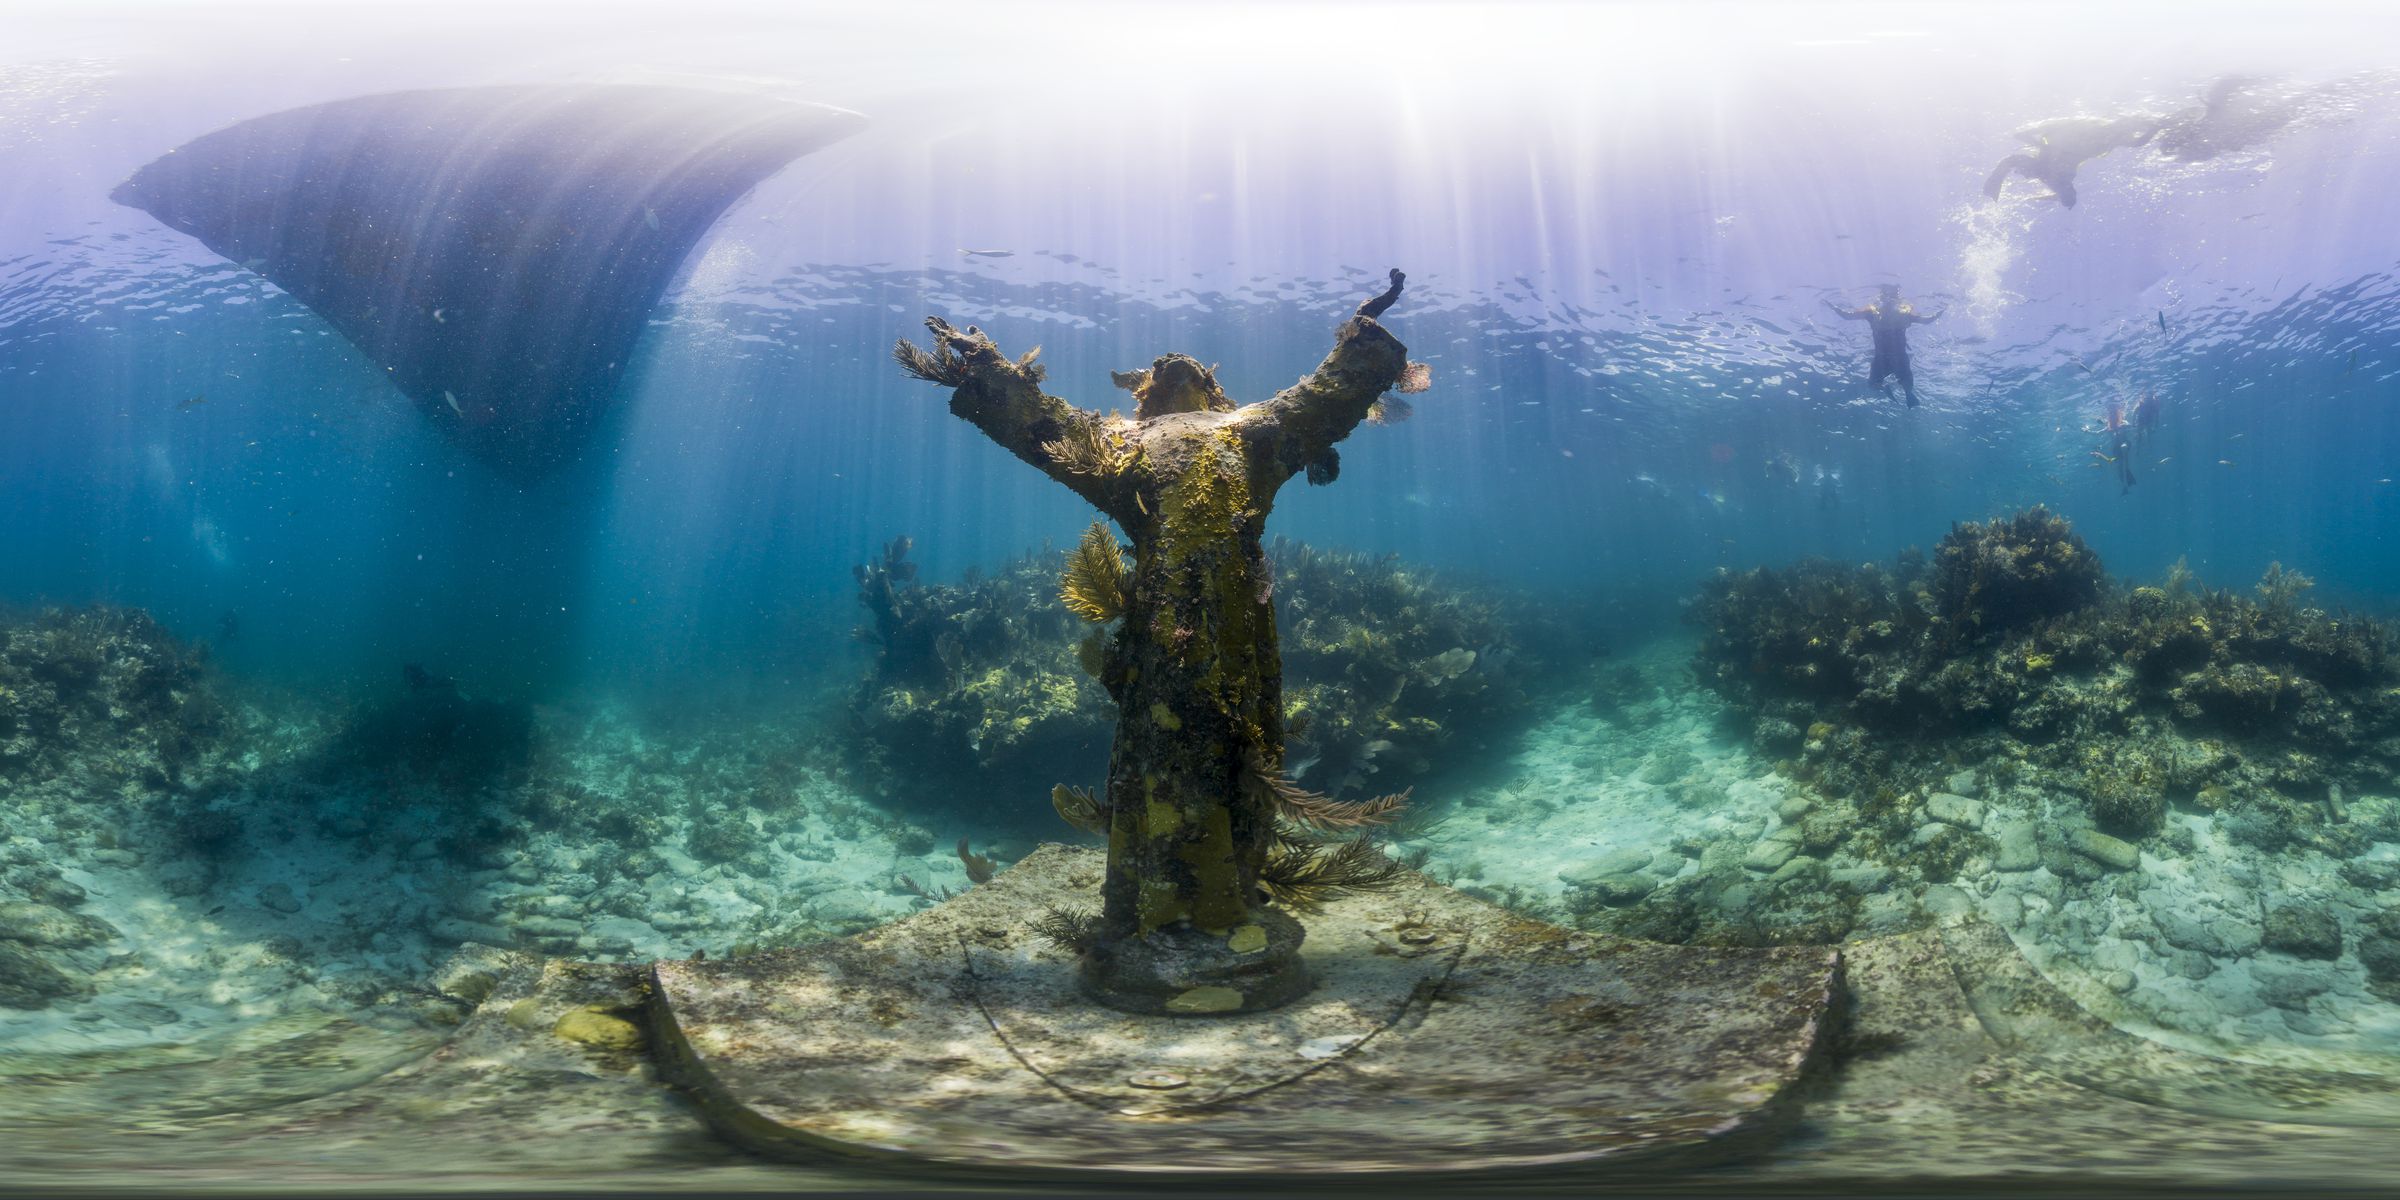 The "Christ of the Abyss" is a 9-foot-long bronze statue located in the Key Largo Dry Docks Sanctuary Preservation Area of Florida Keys National Marine Sanctuary.